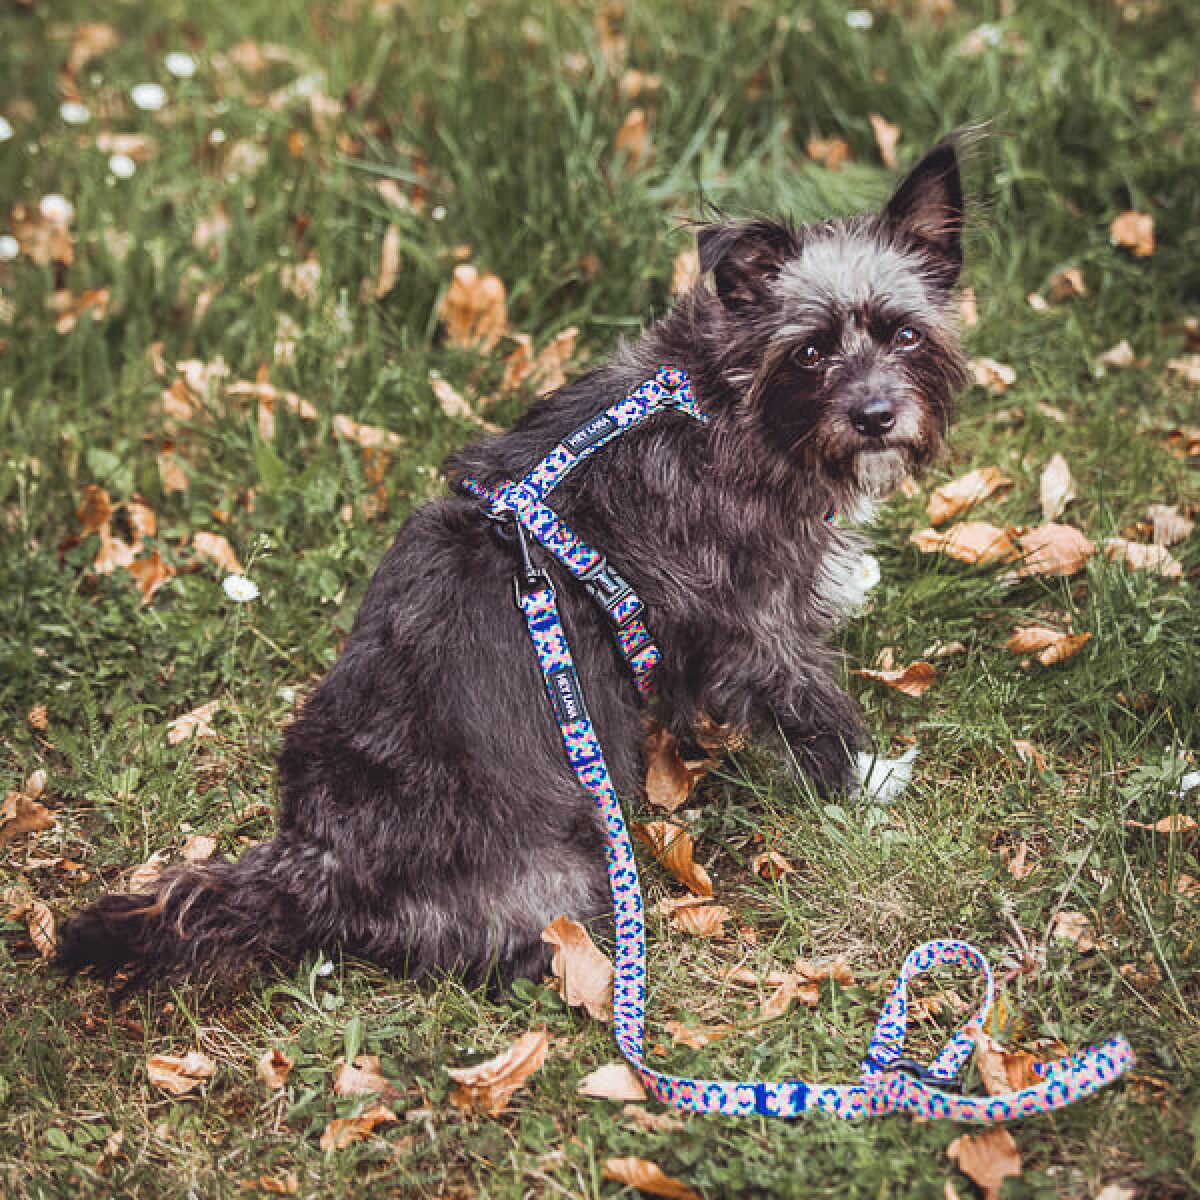 Dog with Kunterbunt lead and harness in pink/turquoise